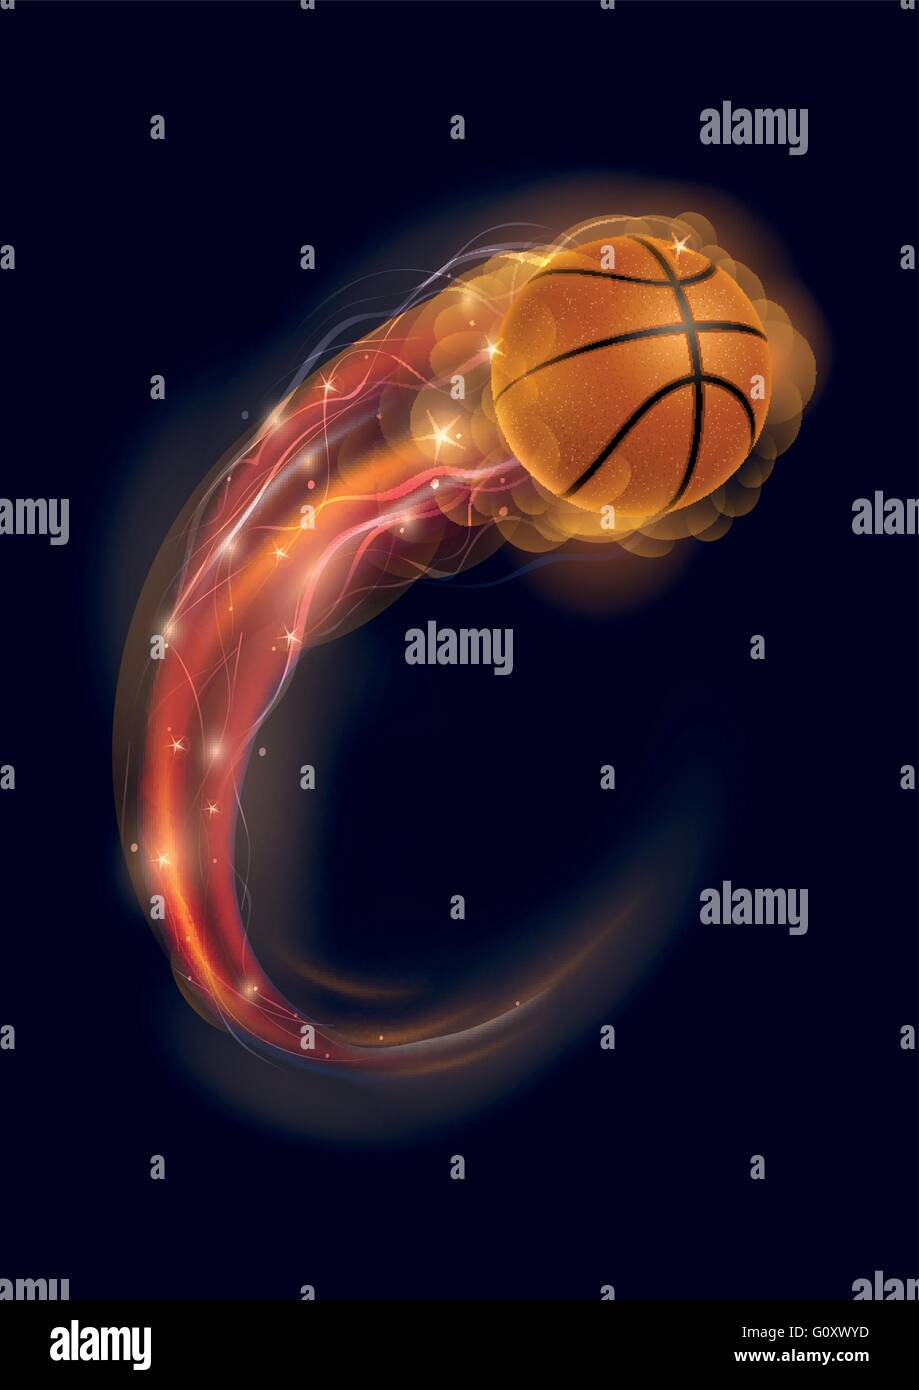 Basketball ball in flames and lights against black background. Vector illustration. Stock Vector